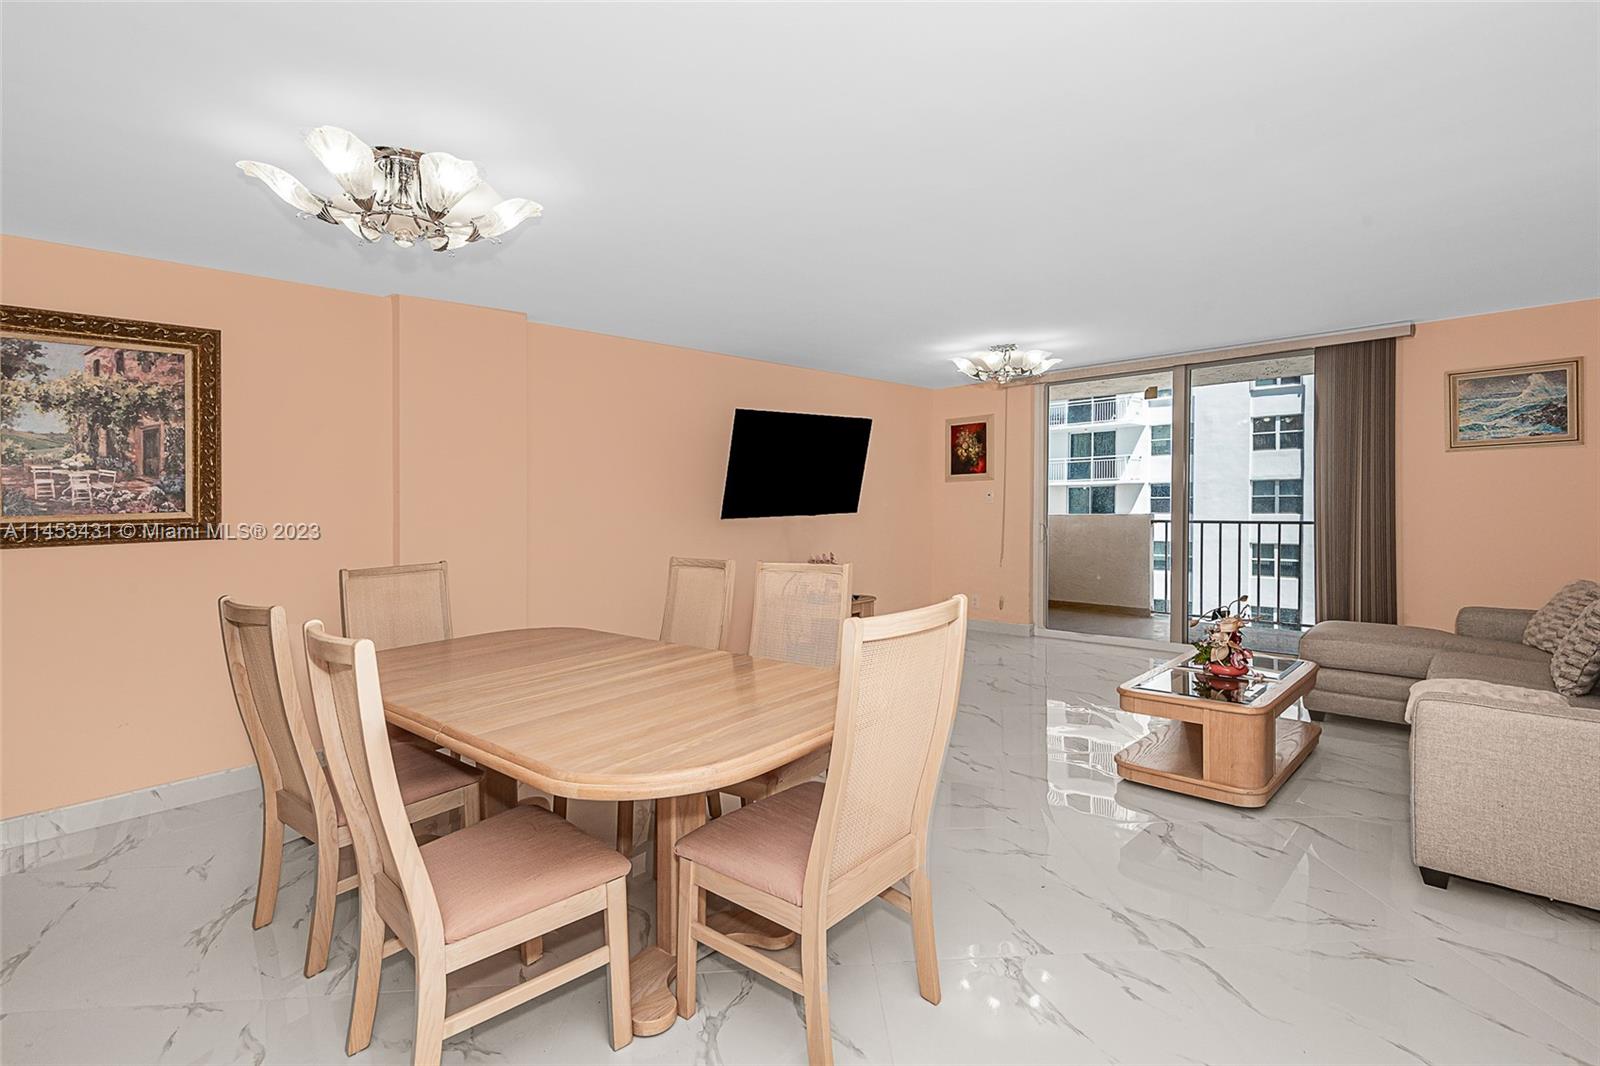 Photo 1 of Prince George Arms Condo Apt 9D in Hallandale Beach - MLS A11453431